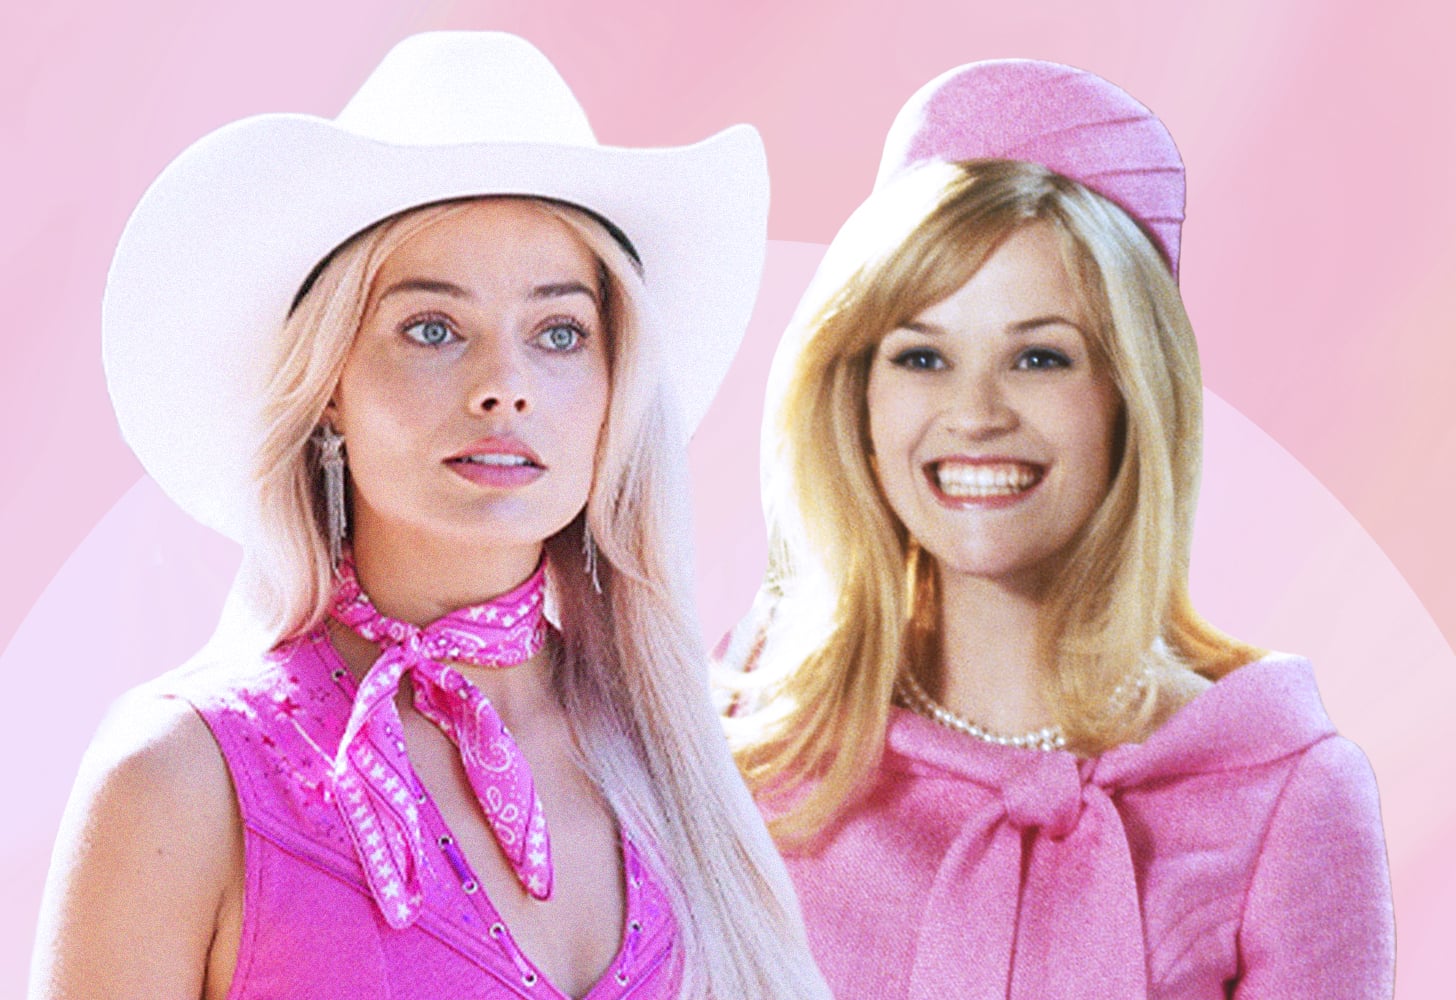 Movies like Barbie and Legally Blonde represent a shift in narrative around the "dumb blonde" stereotype.